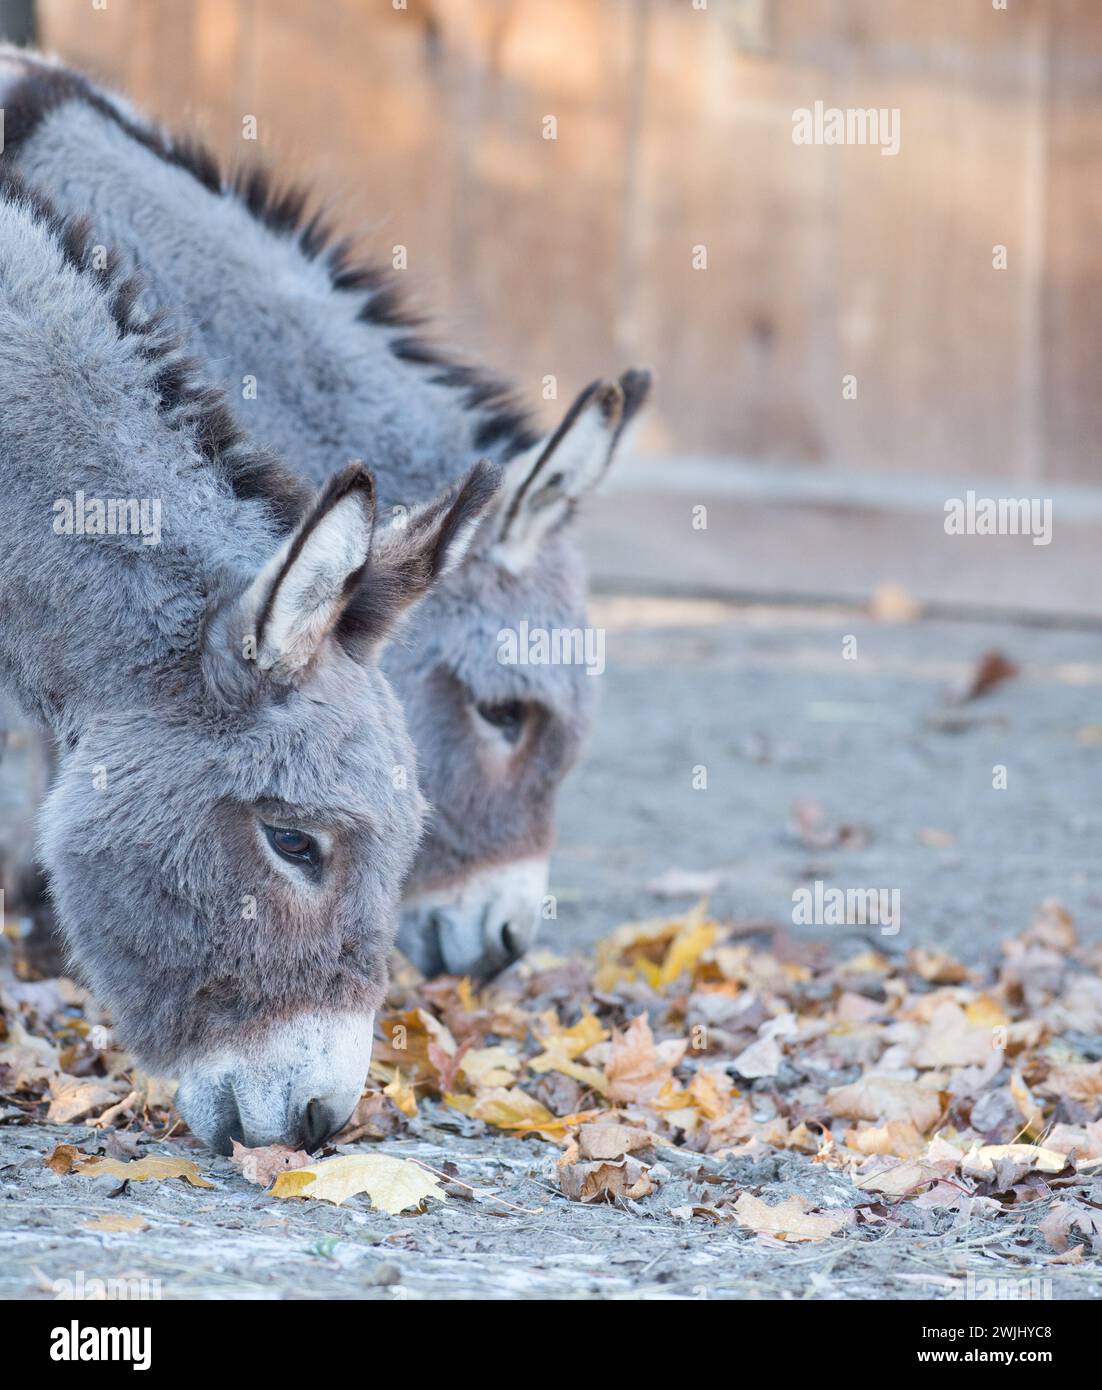 two miniature donkeys cute animals with heads down sniffing fall autumn leaves ears forward look alikes vertical image room for type rural farm canada Stock Photo